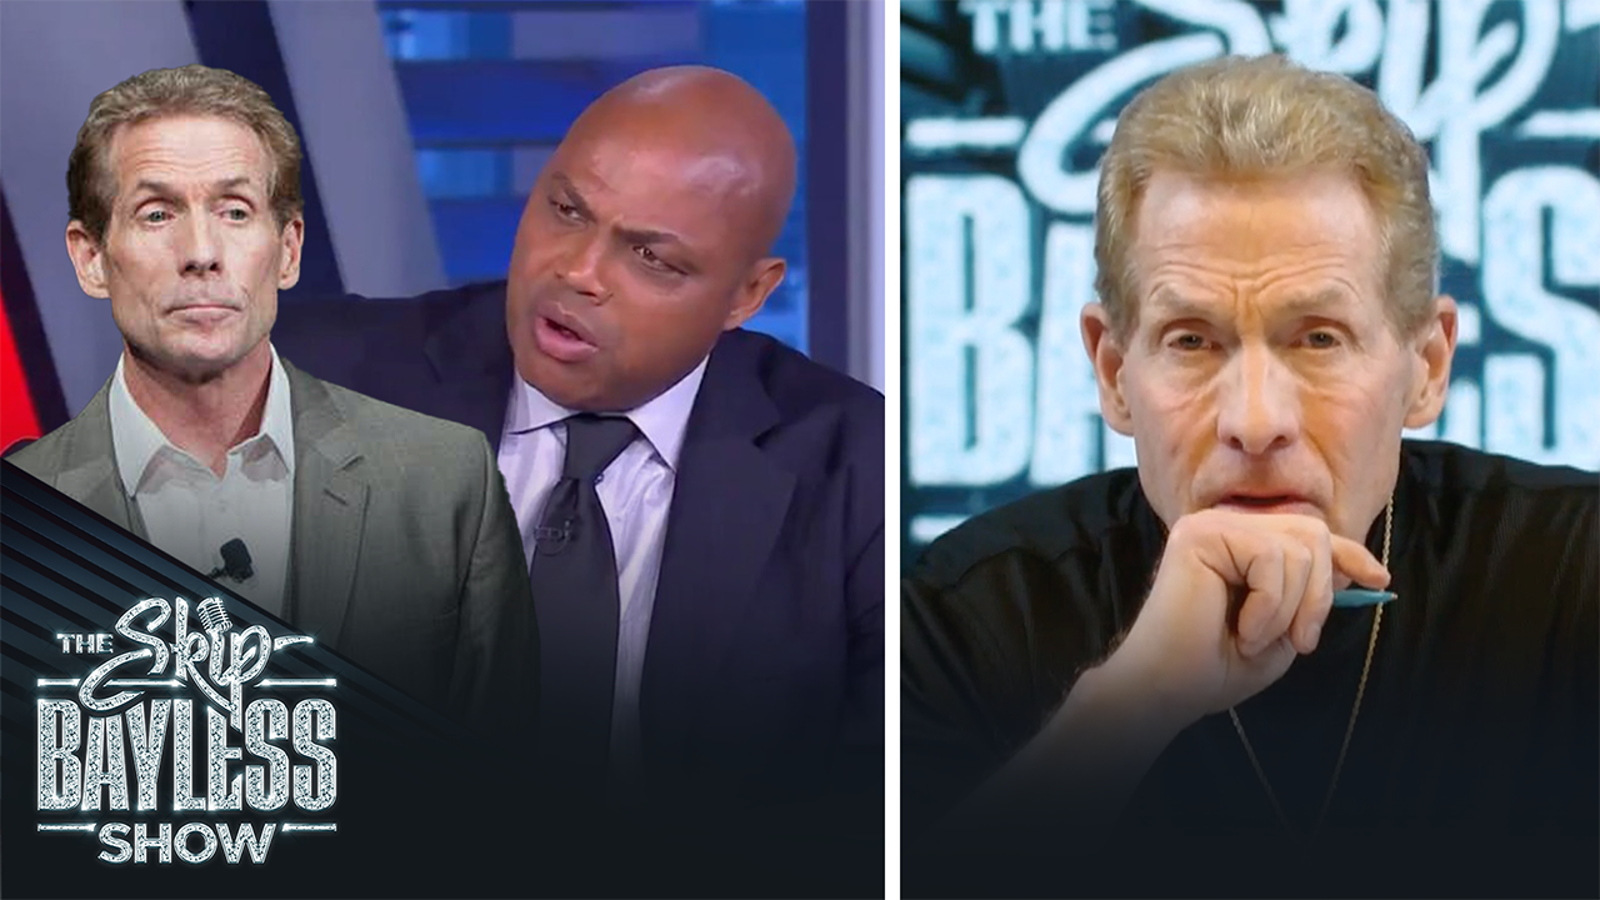 Skip Bayless asked Charles Barkley to join him on TV